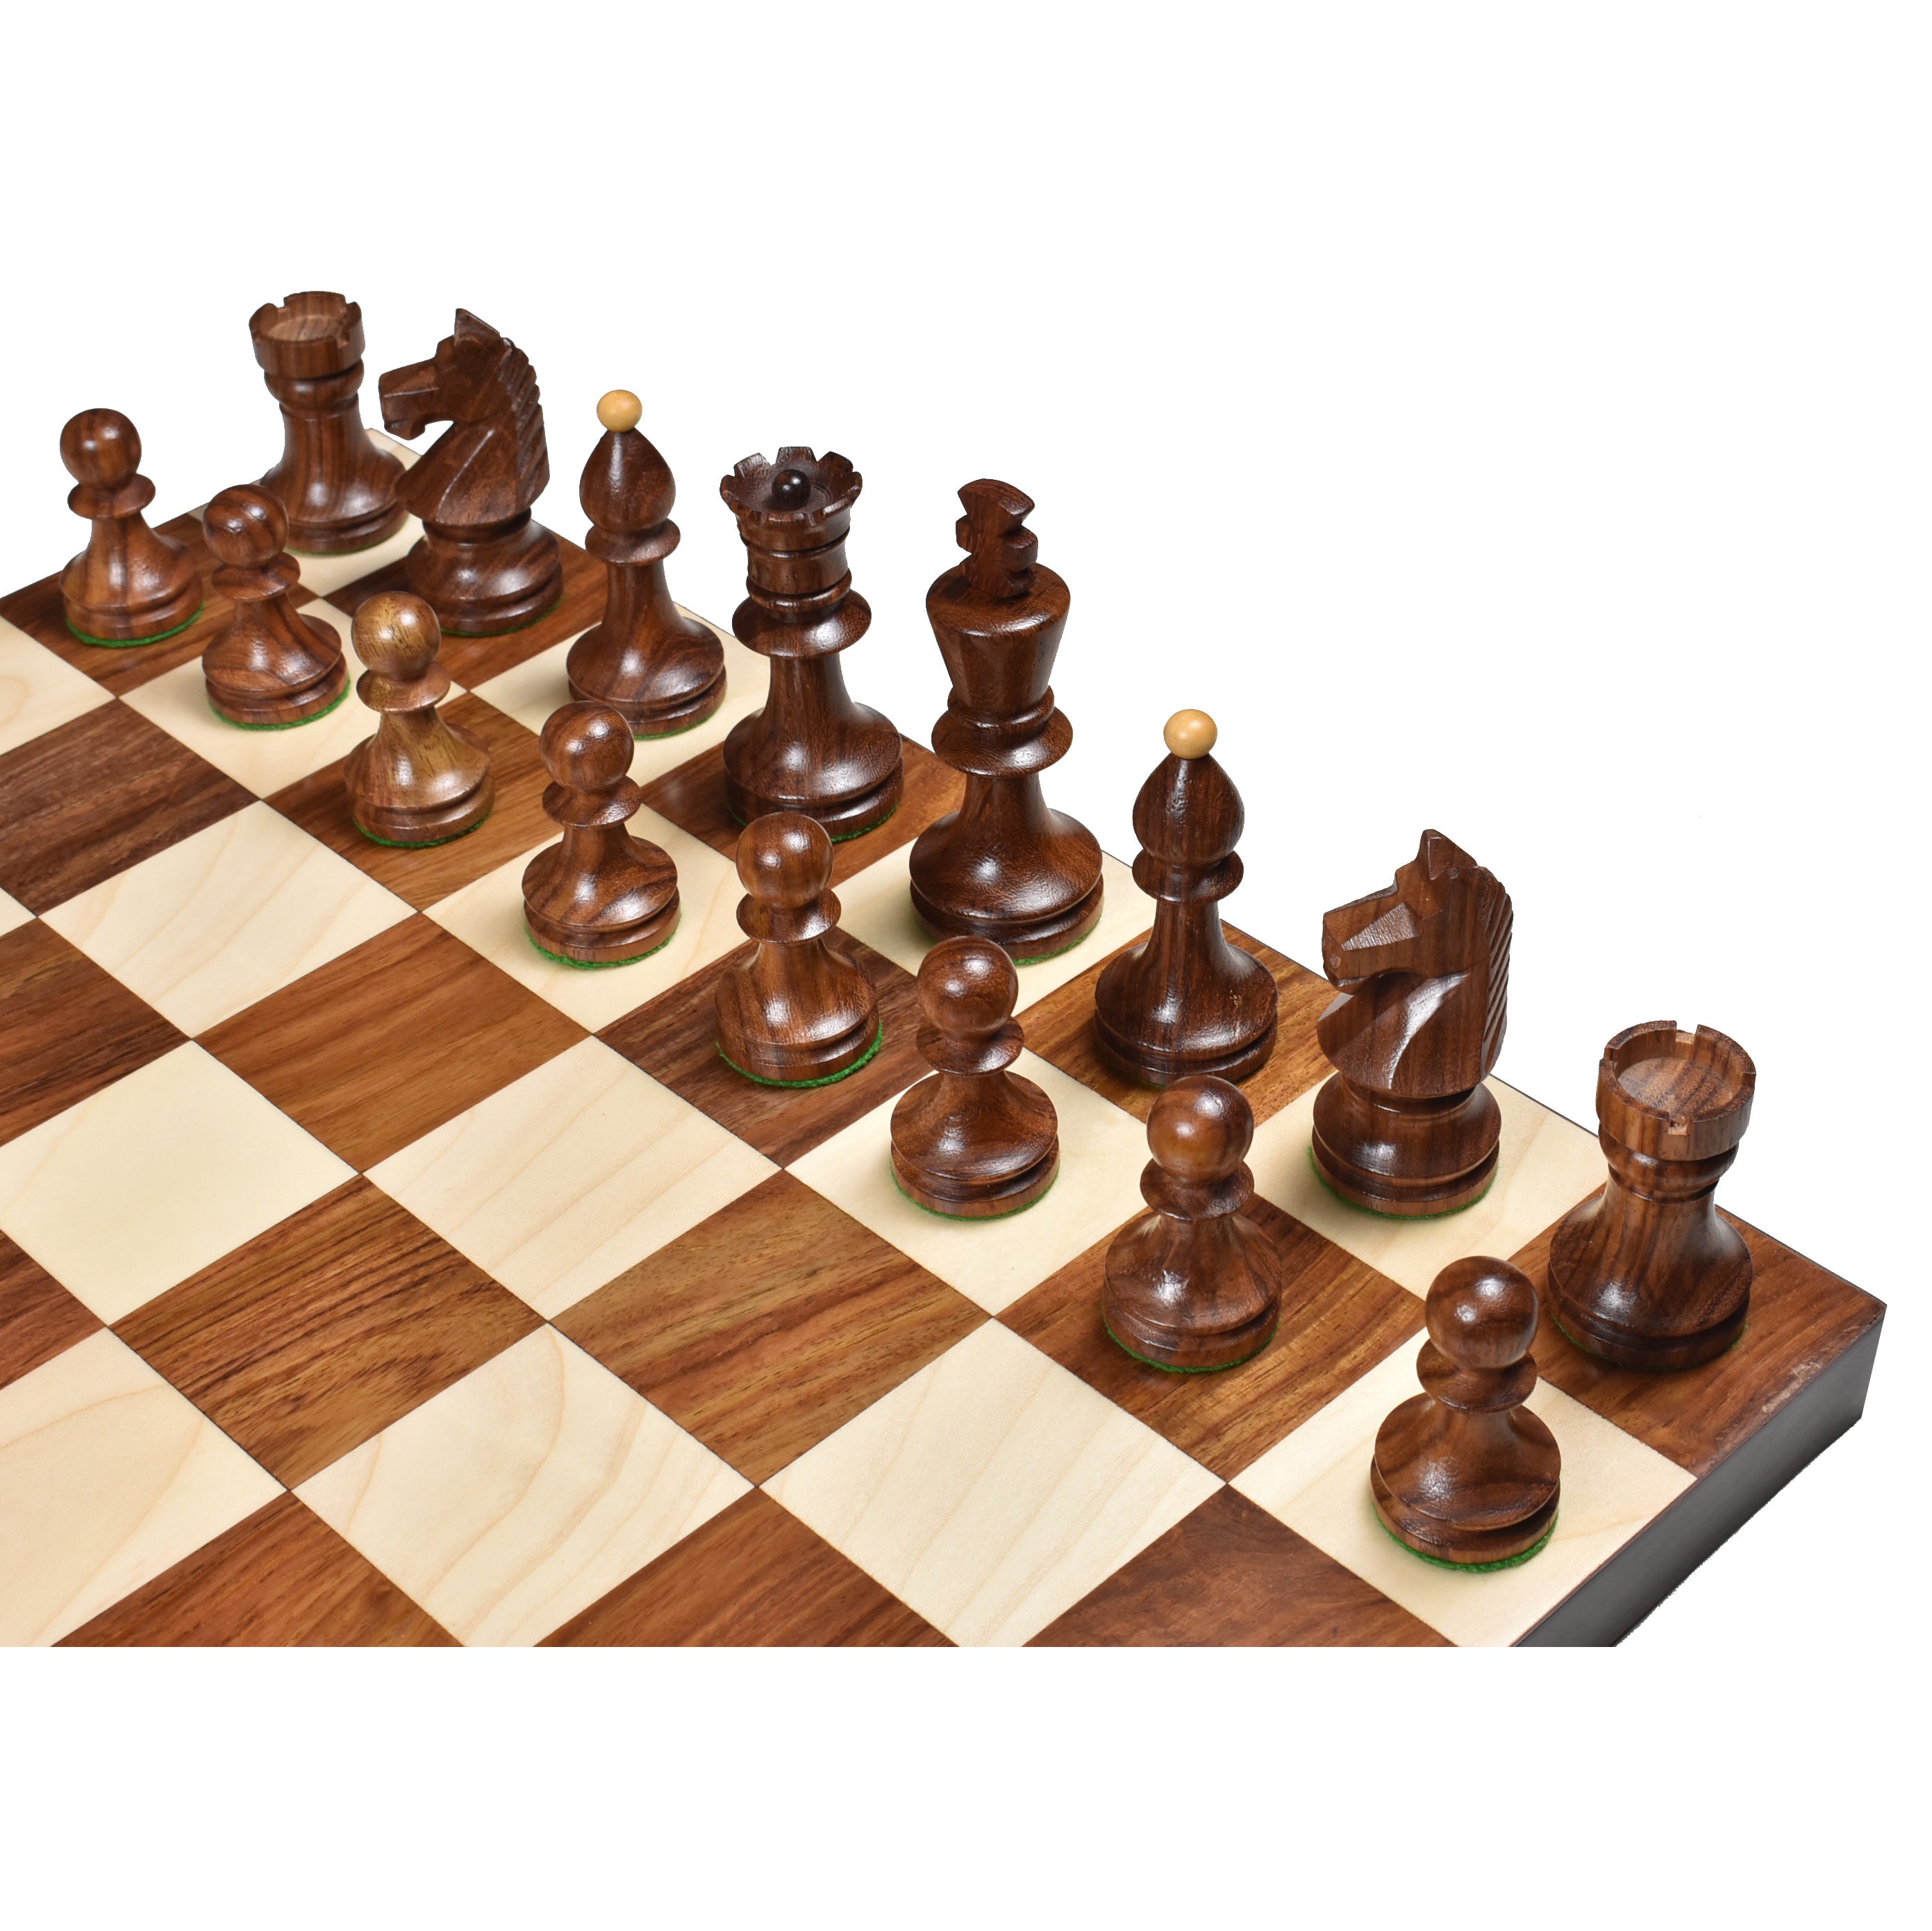 3.8" Romanian Hungarian Chess Pieces only set - Weighted Golden Rosewood